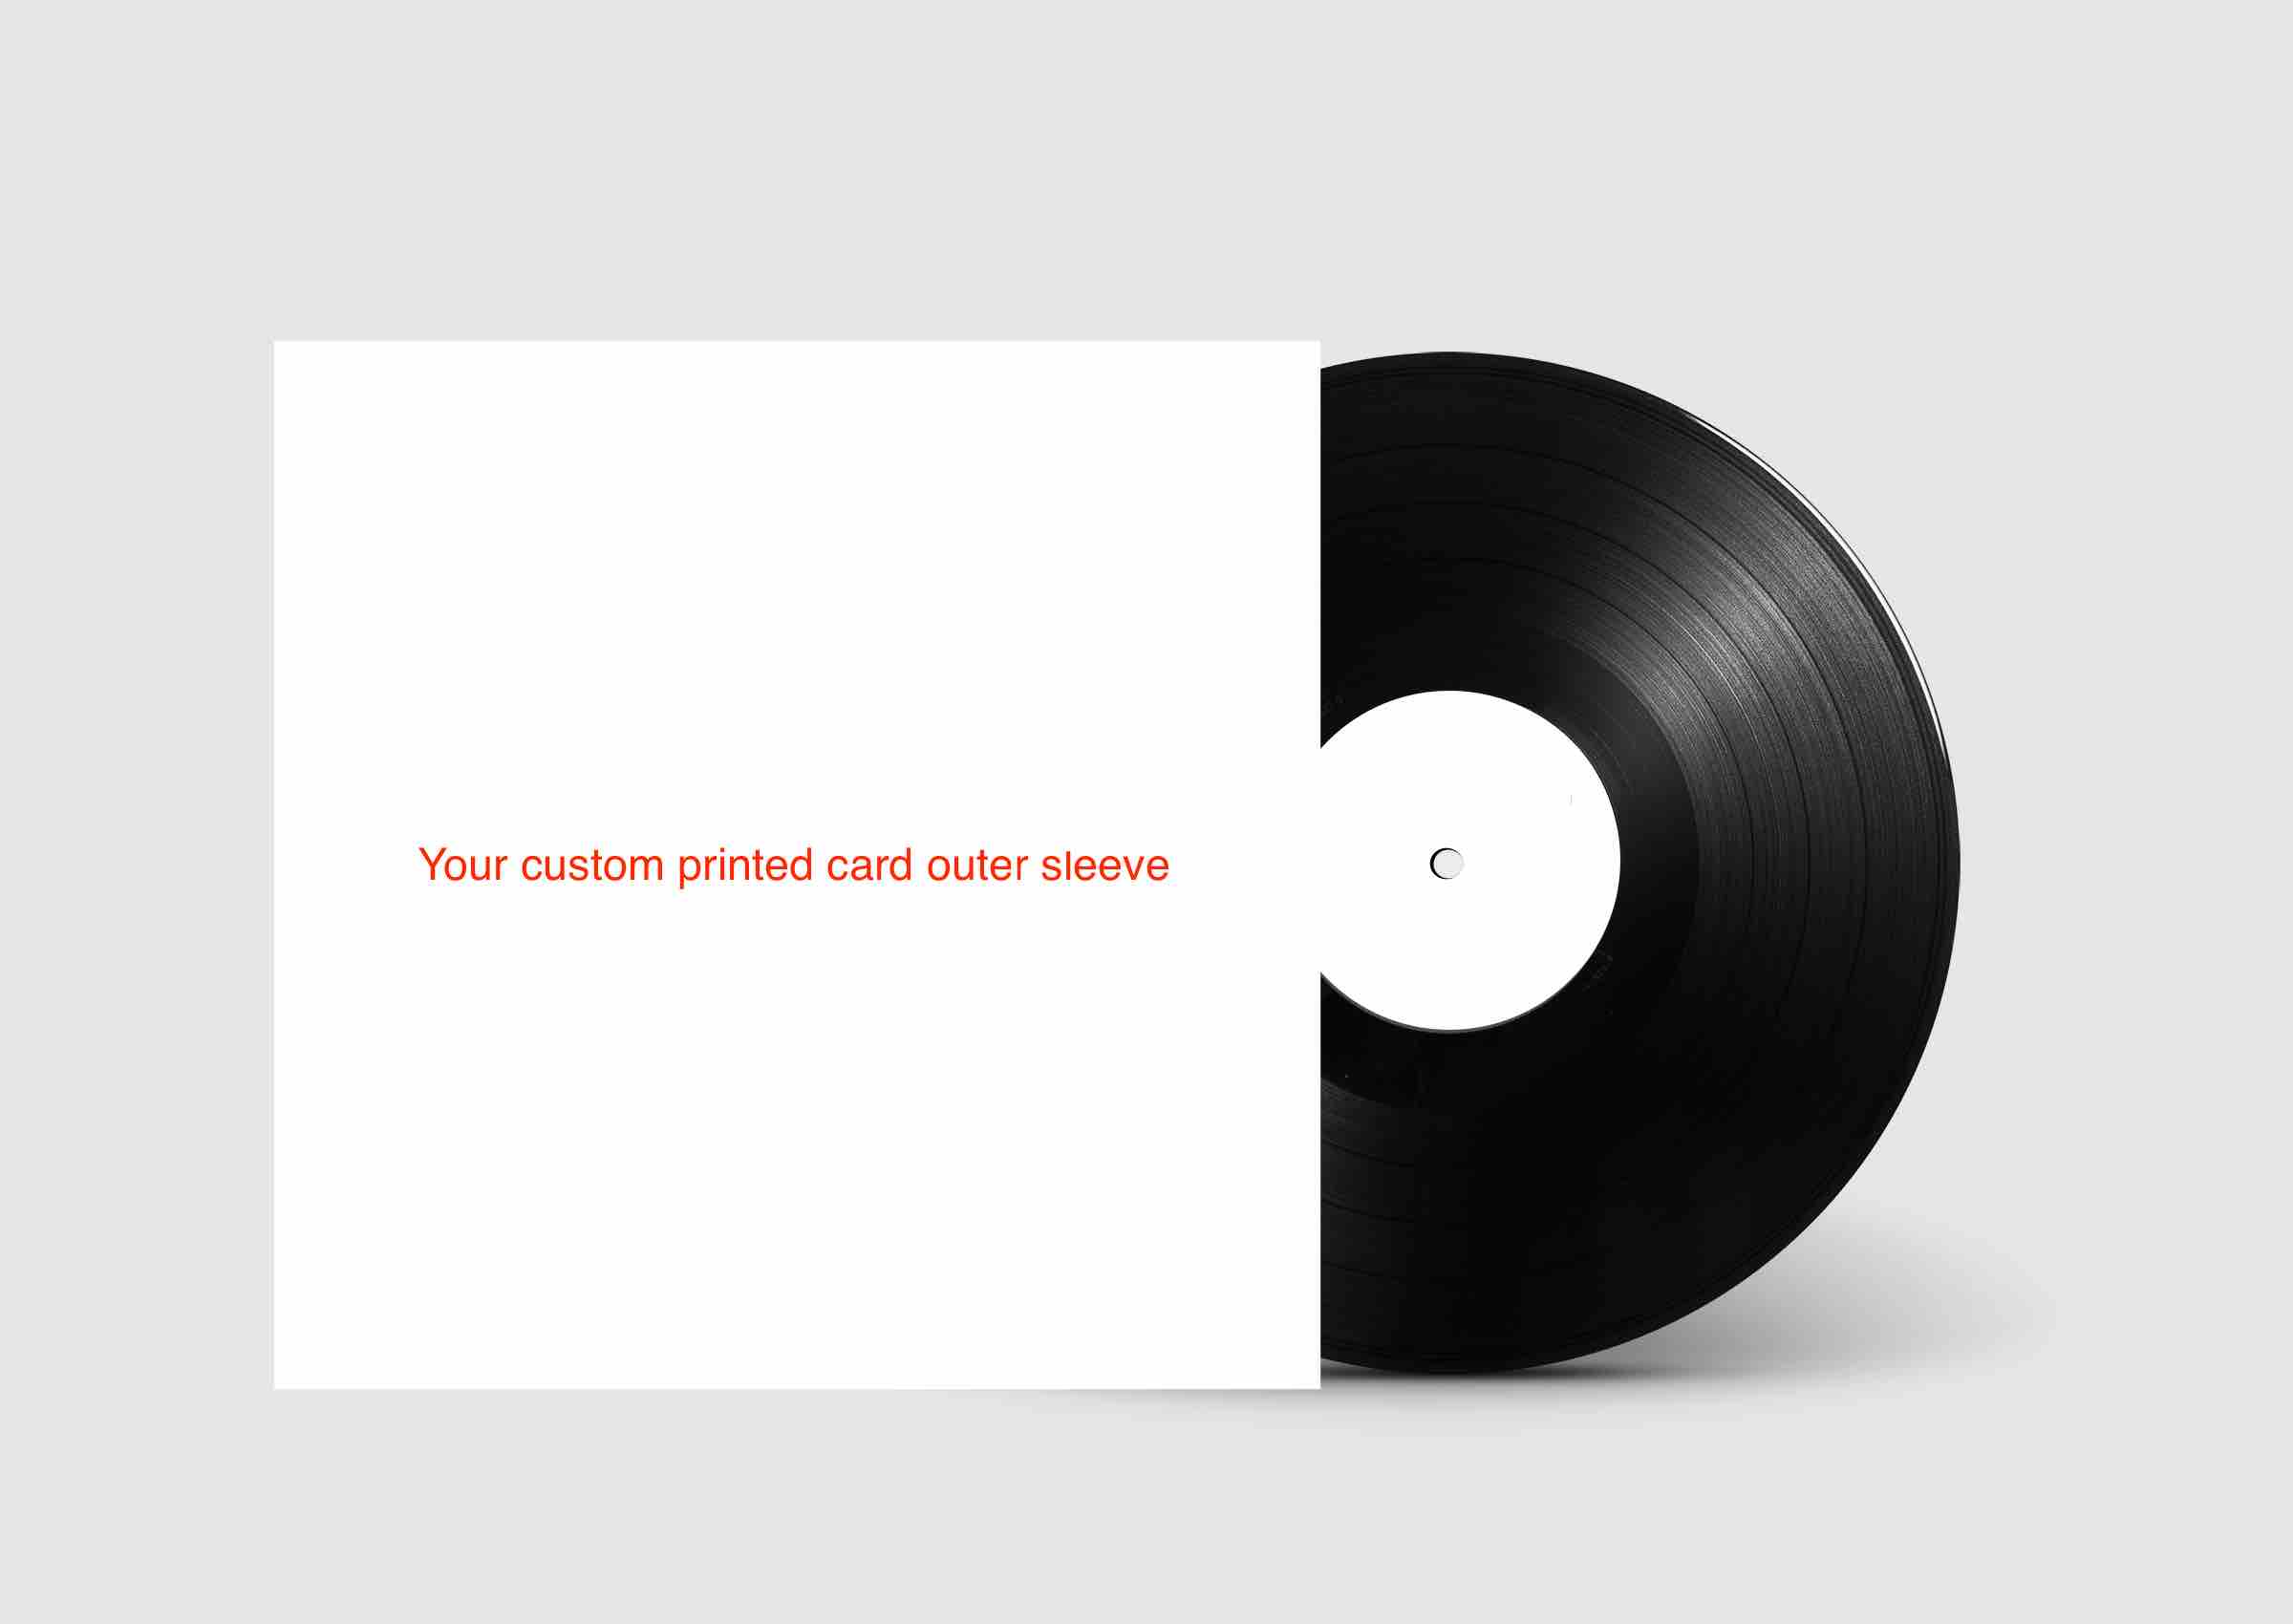 Printed card outer sleeve | One Cut Vinyl